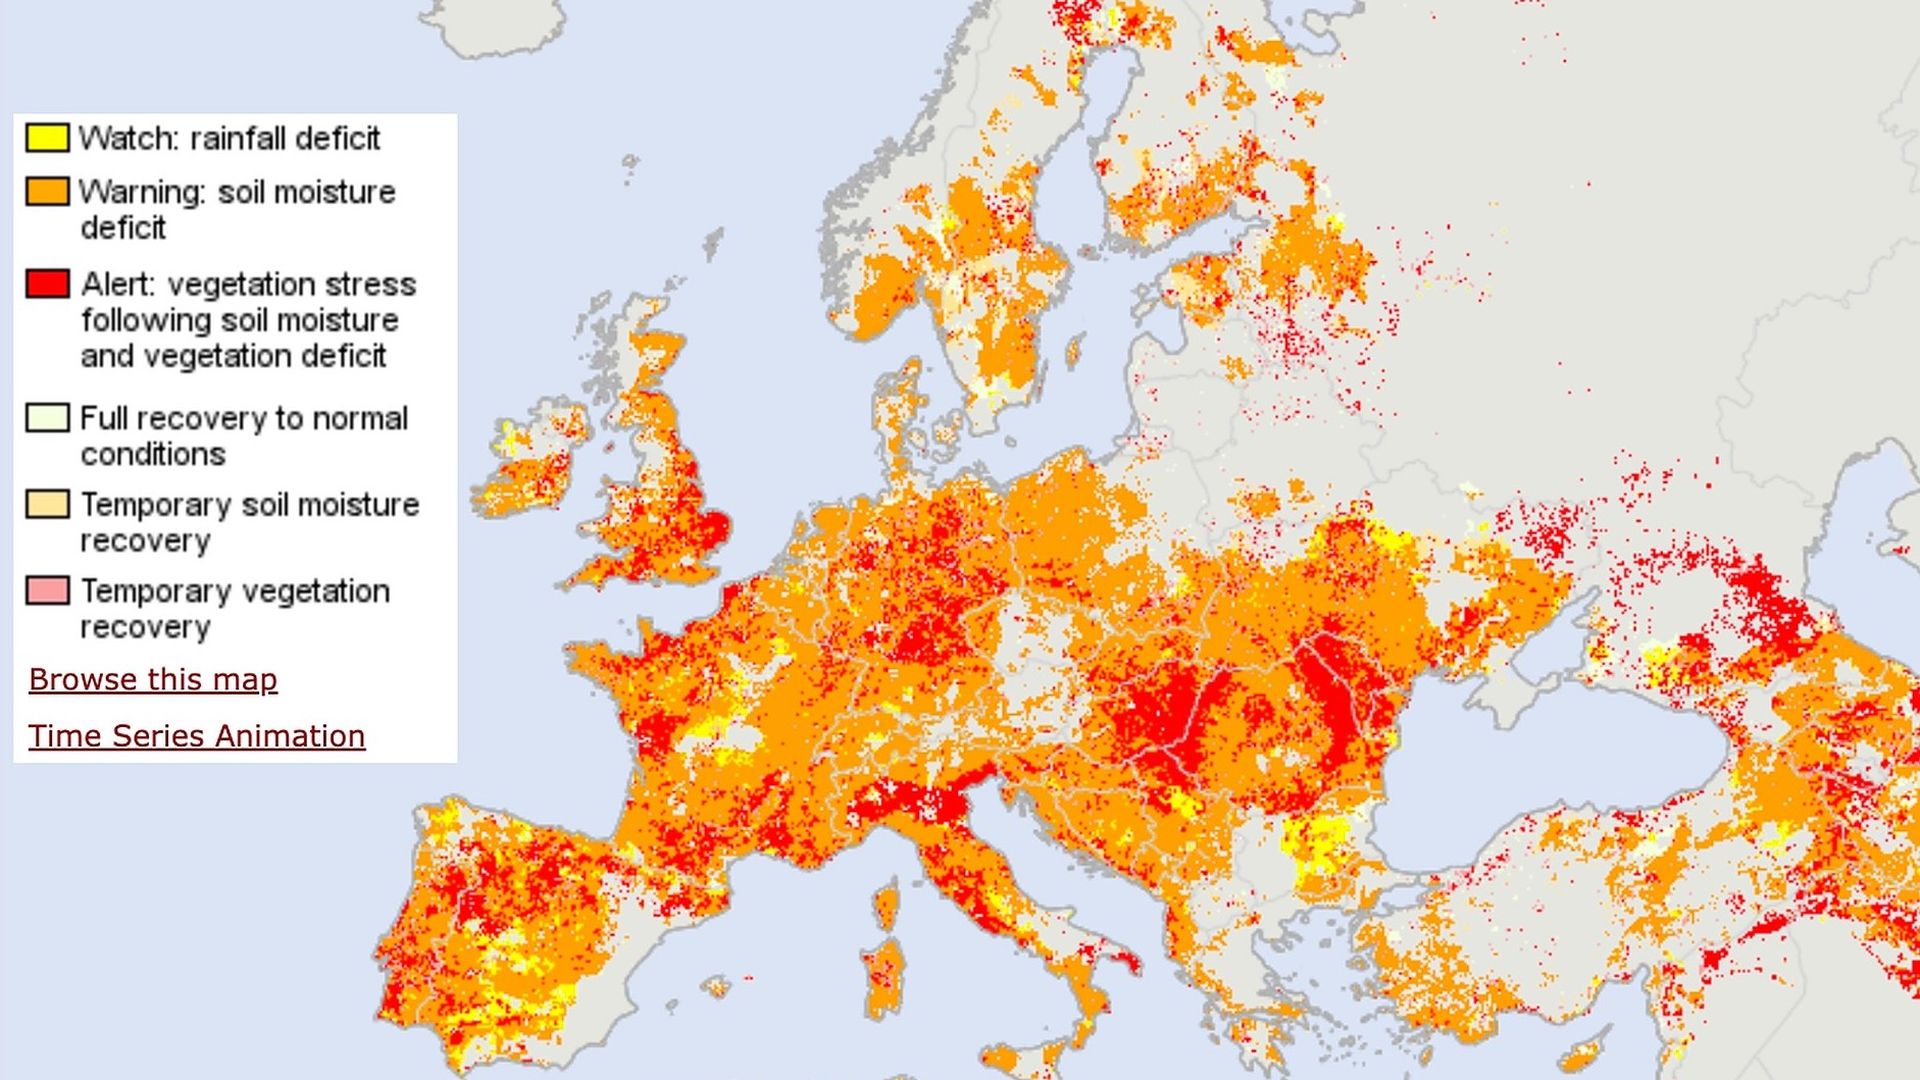 population map of europe 2022